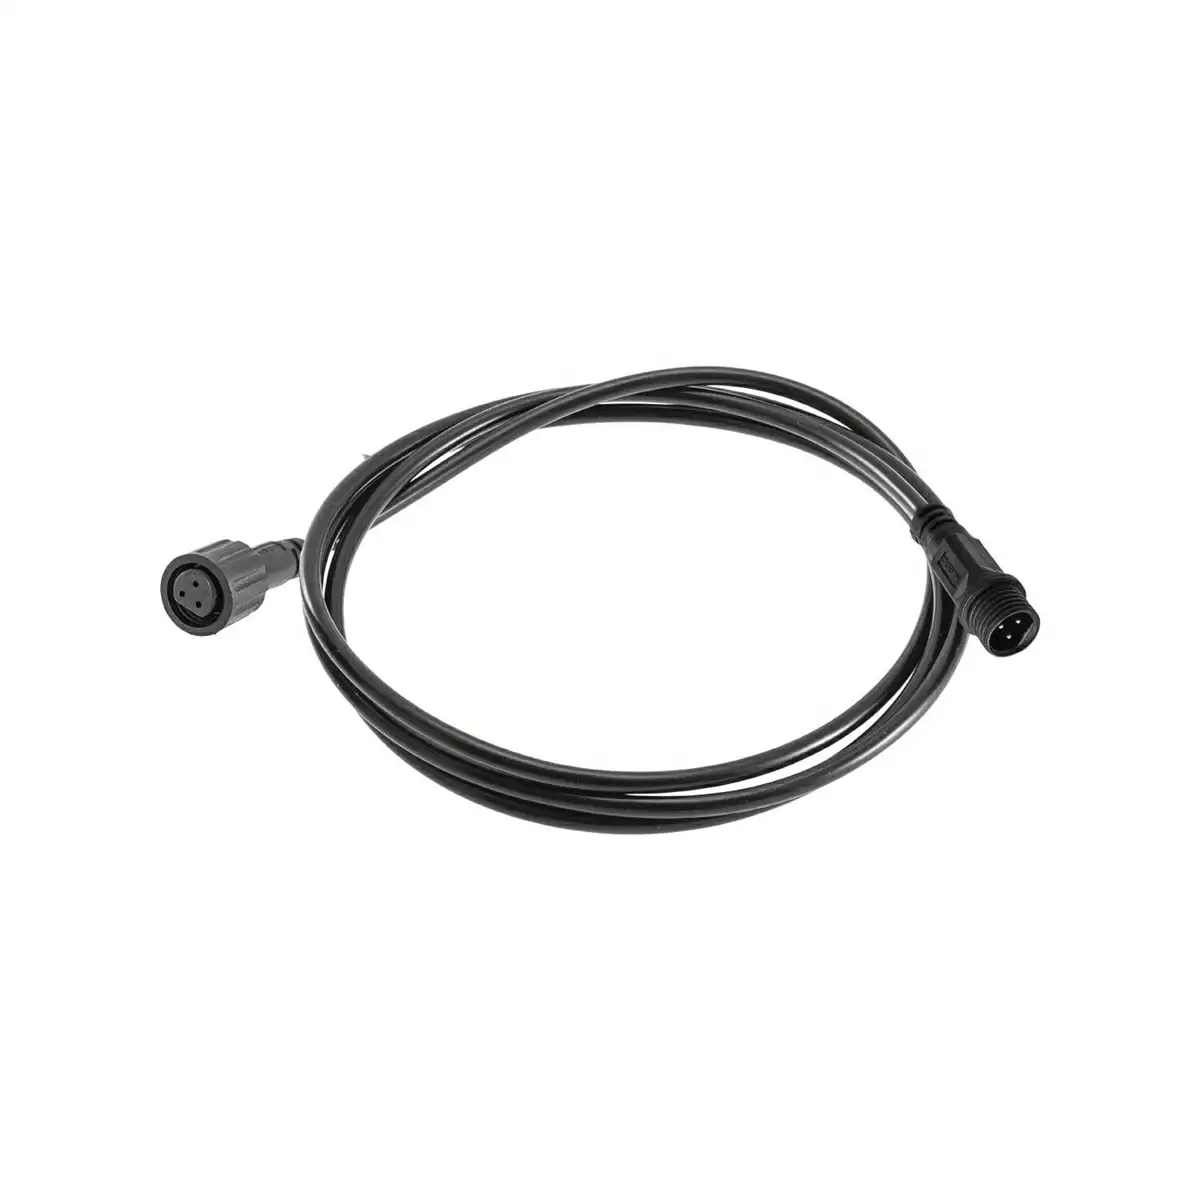 Speed Sensor Extension Cable 50cm - image